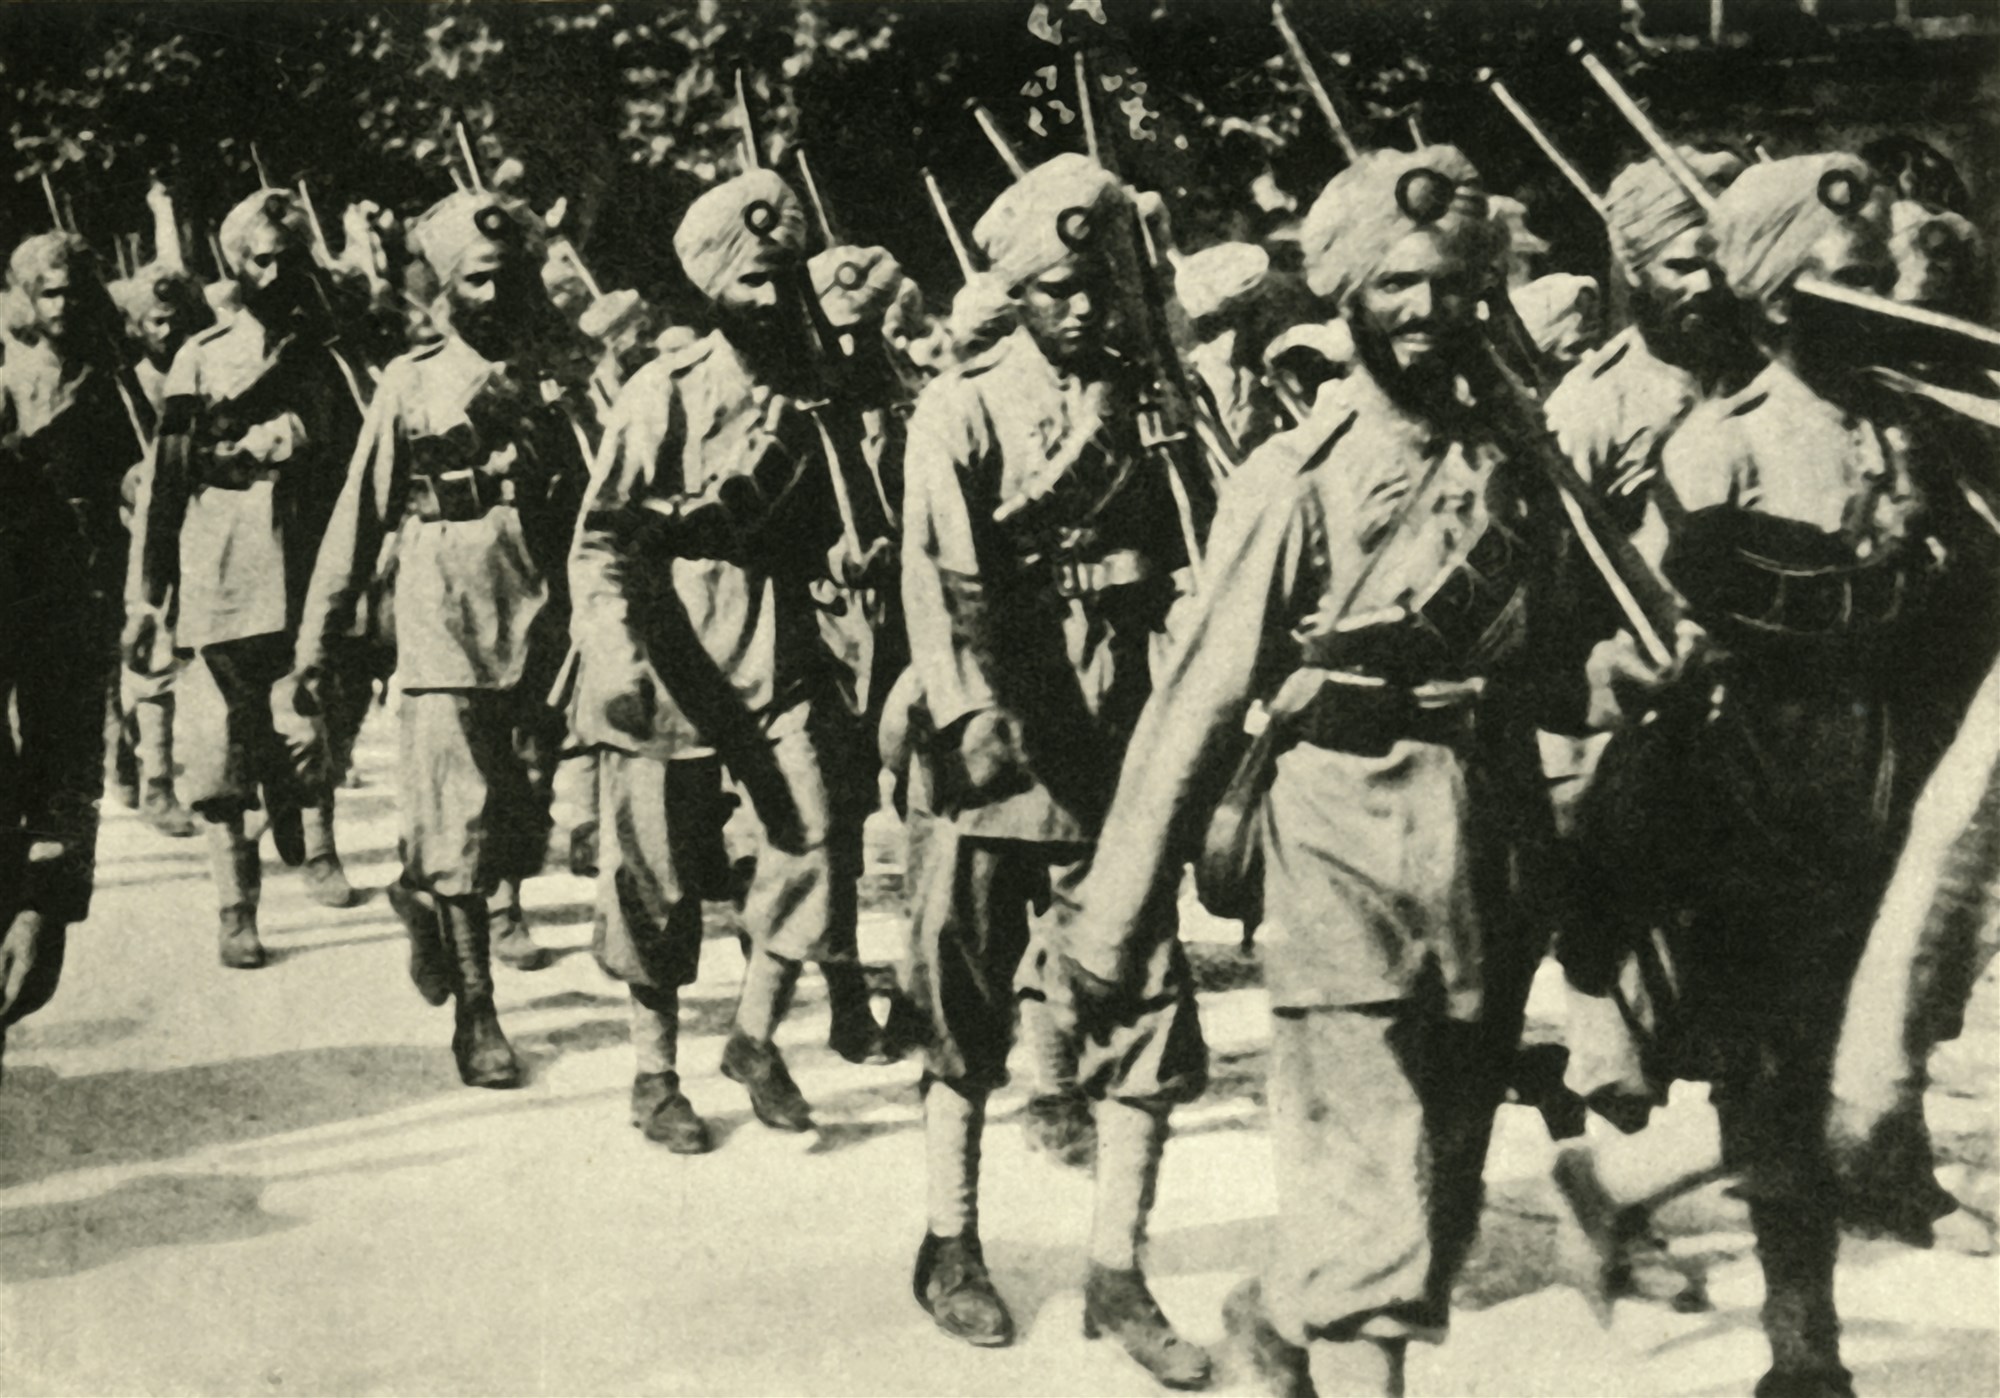 Black and white photo of Indian soldiers marching in uniforms with guns.